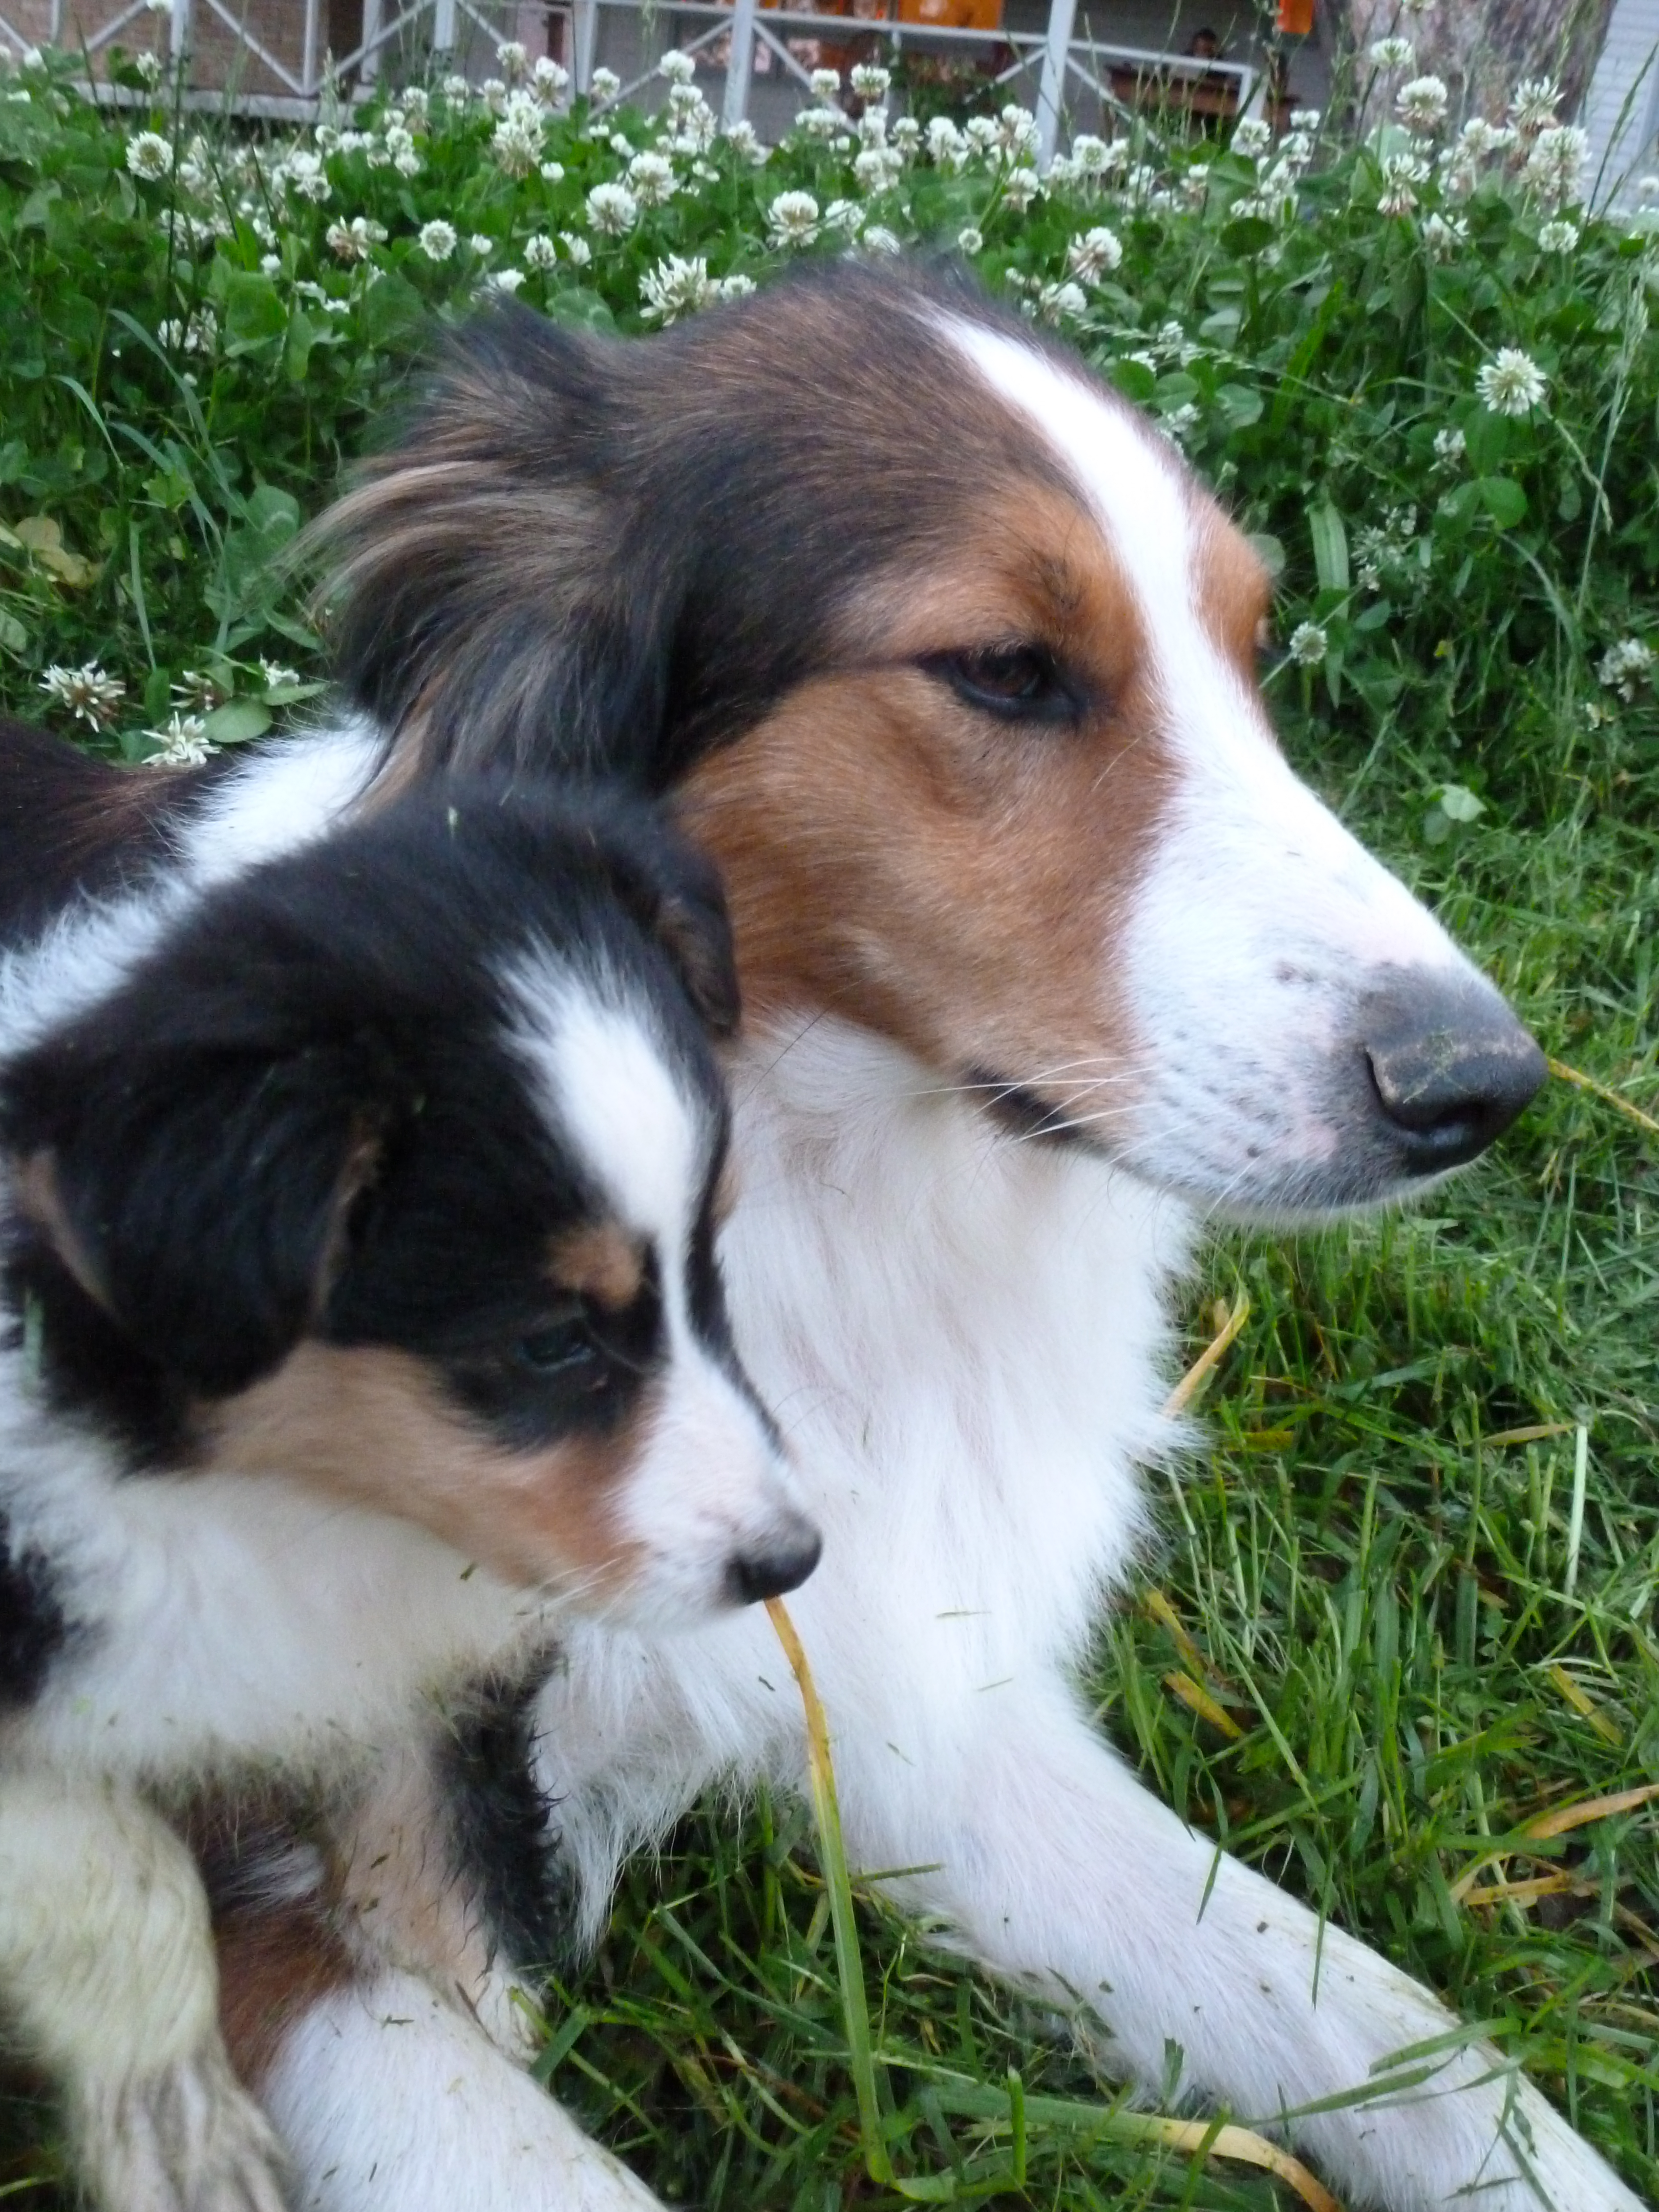 Scotch Collie Dog: Scotch Scotch Collie Dog With Her Puppy Breed